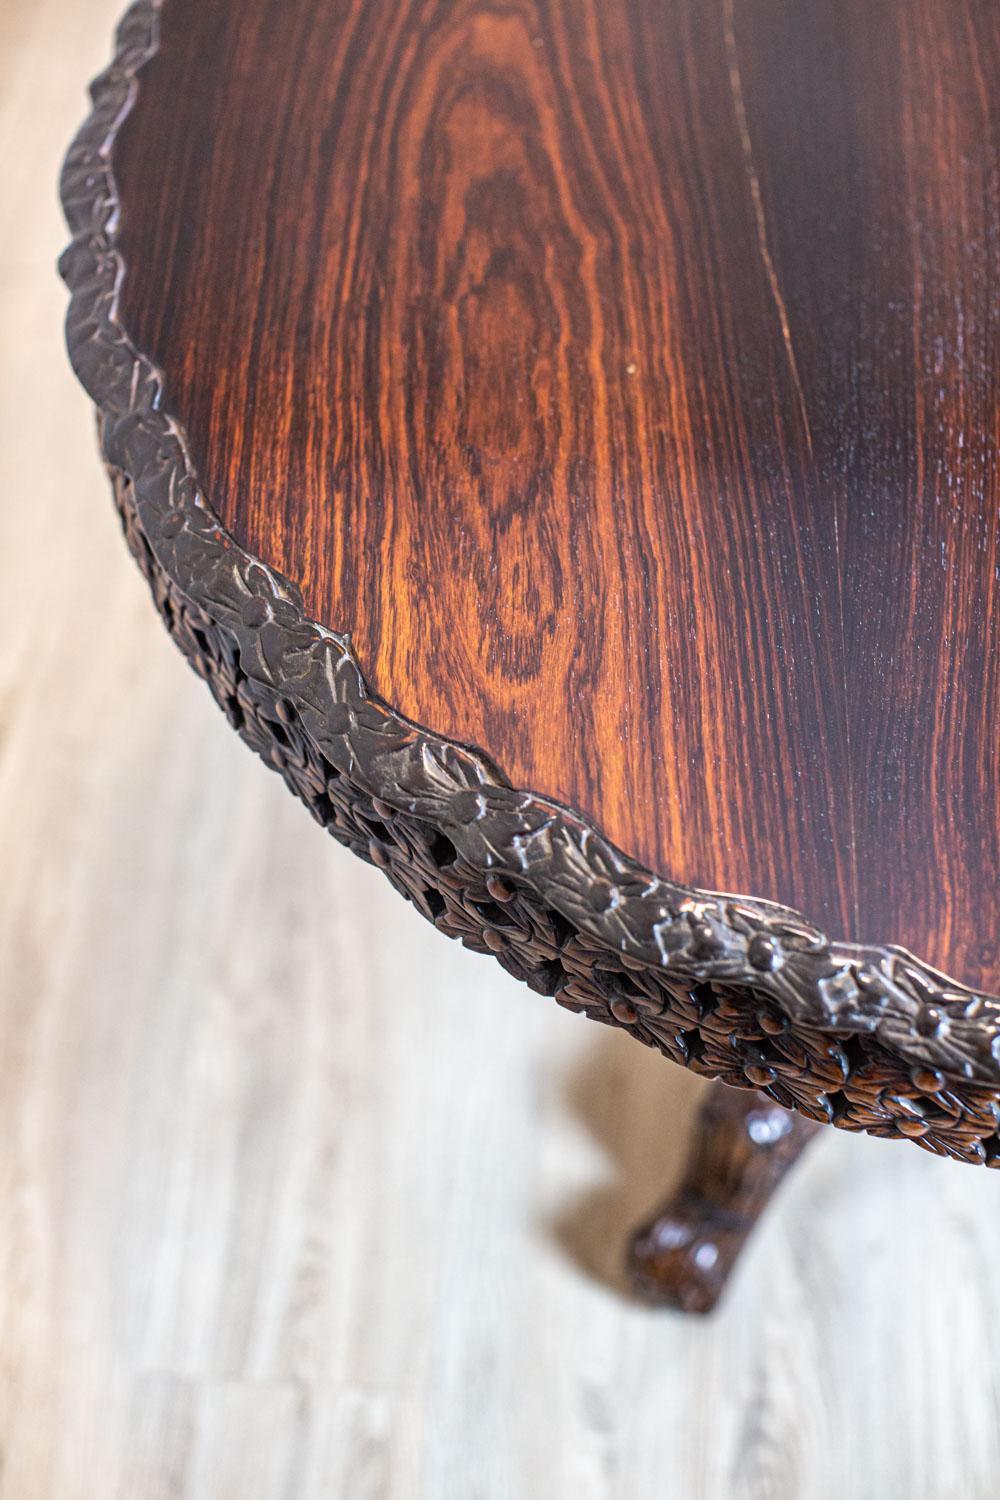 19th Century Decorative Rosewood Table from the Turn of the 19th and 20th Centuries For Sale